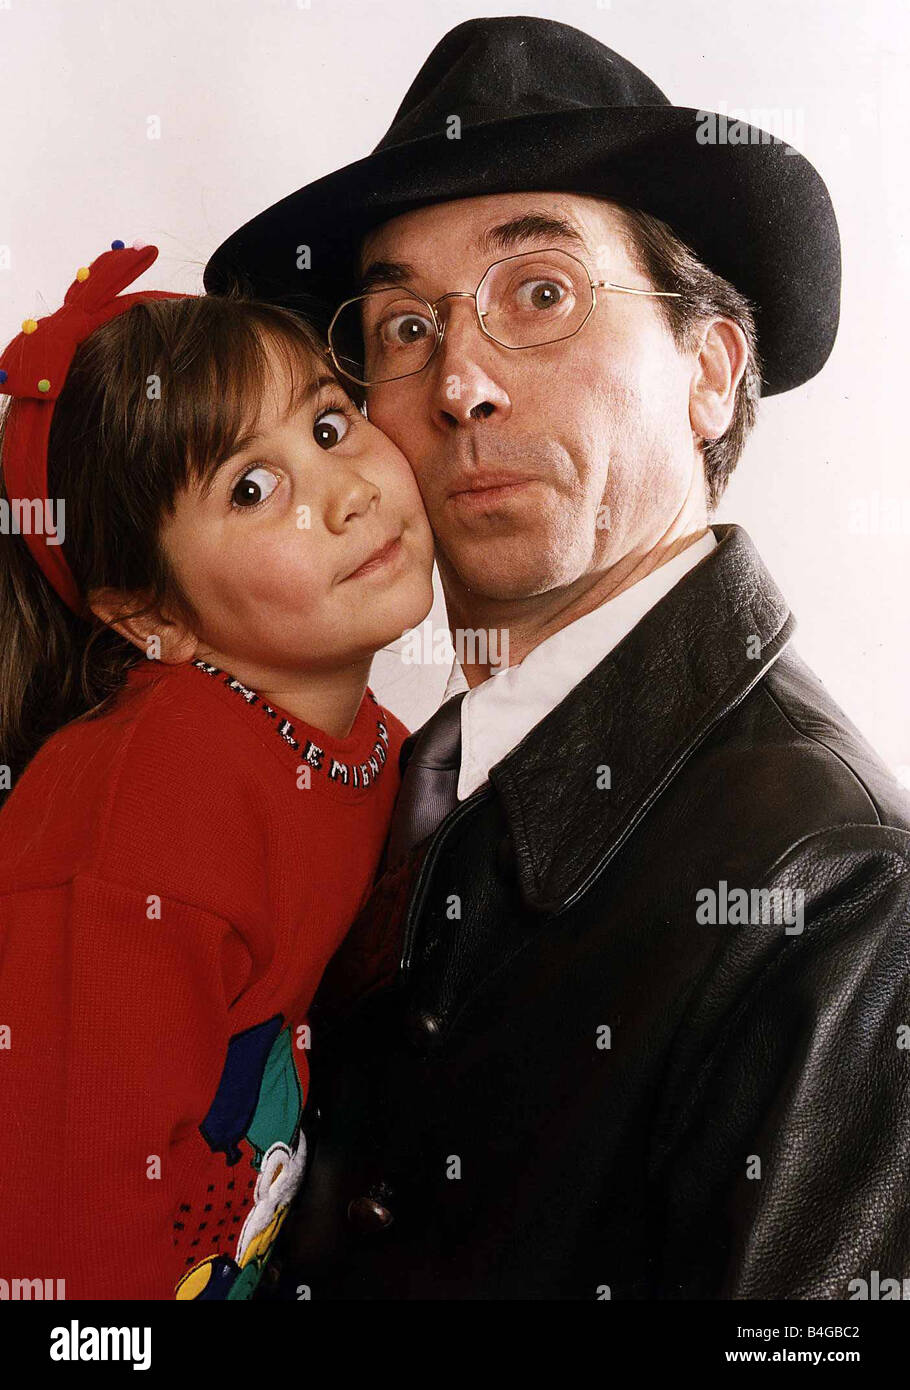 David Janson Actor As The New Herr Flick In The TV Programme Allo Allo With His Daughter Ciara Stock Photo